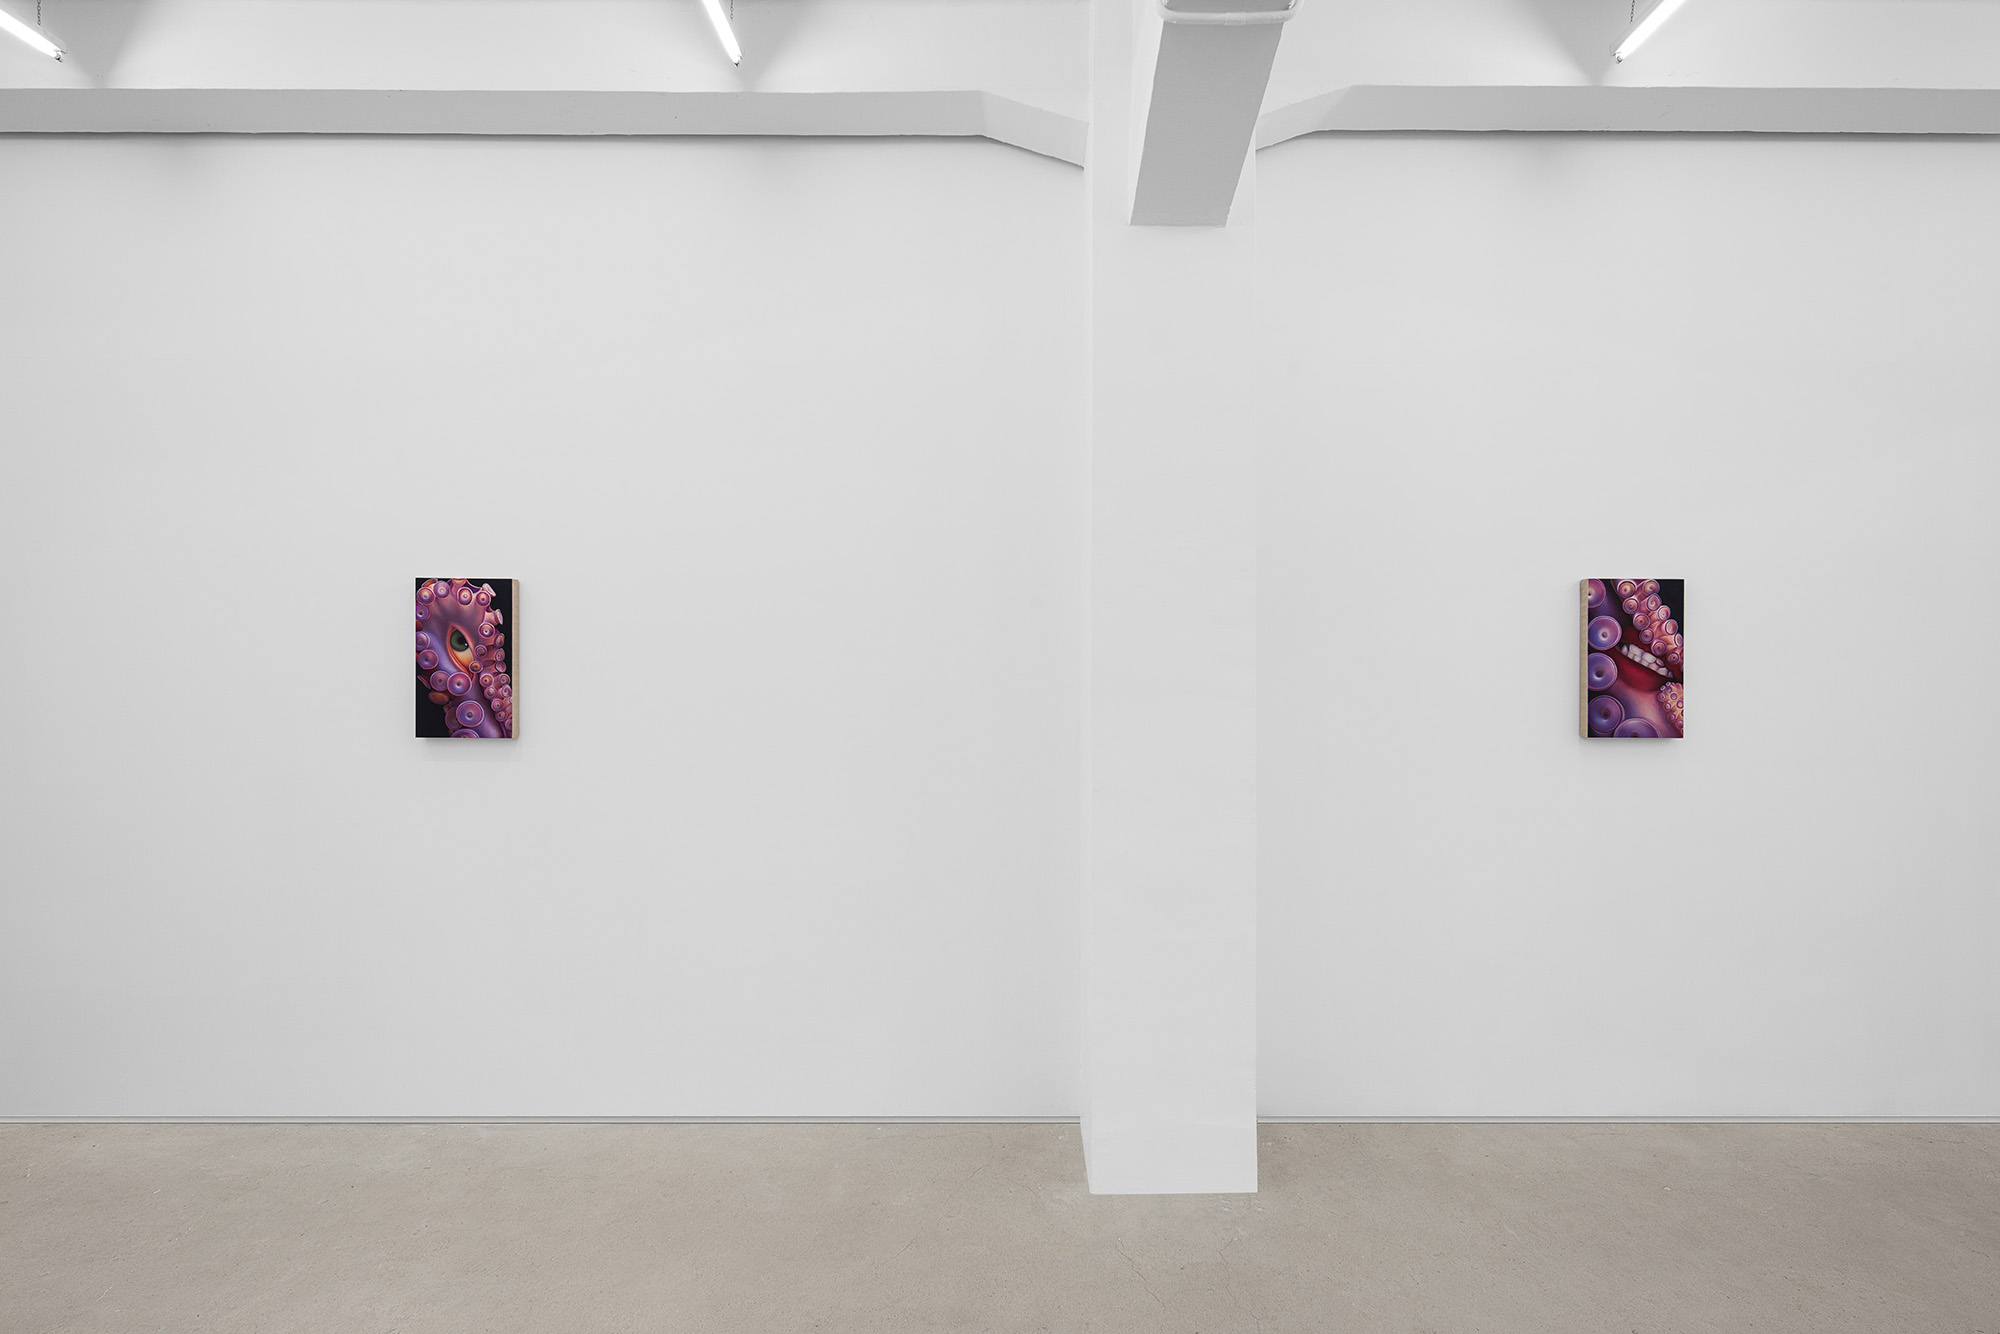 Installation view of group exhibition, Vacation II, at Gallery Vacancy, featuring works by Ariane Heloise Hughes.